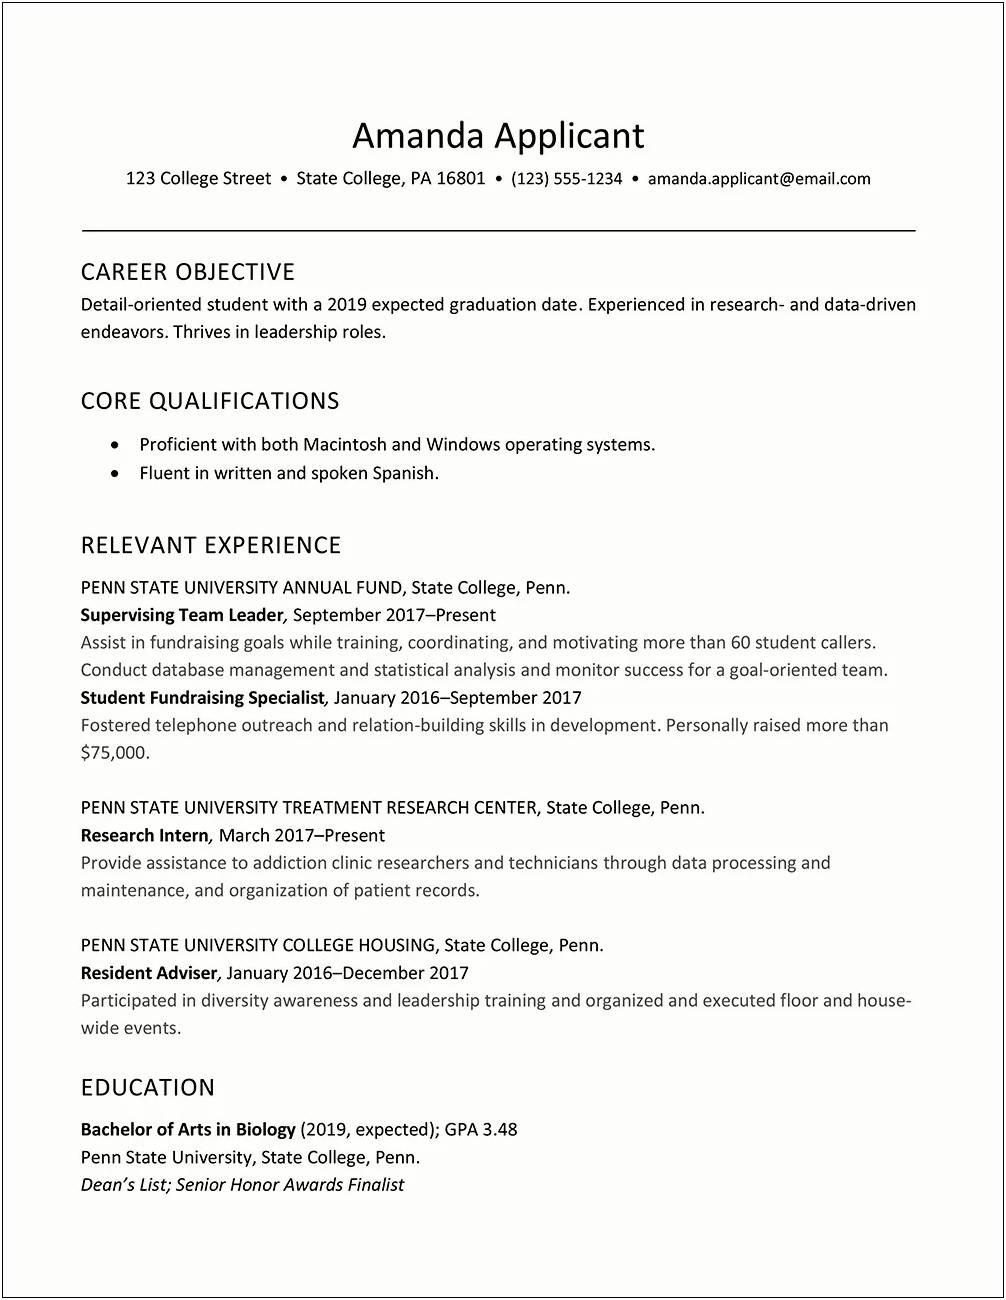 Resume Objective For Outreach Specialist